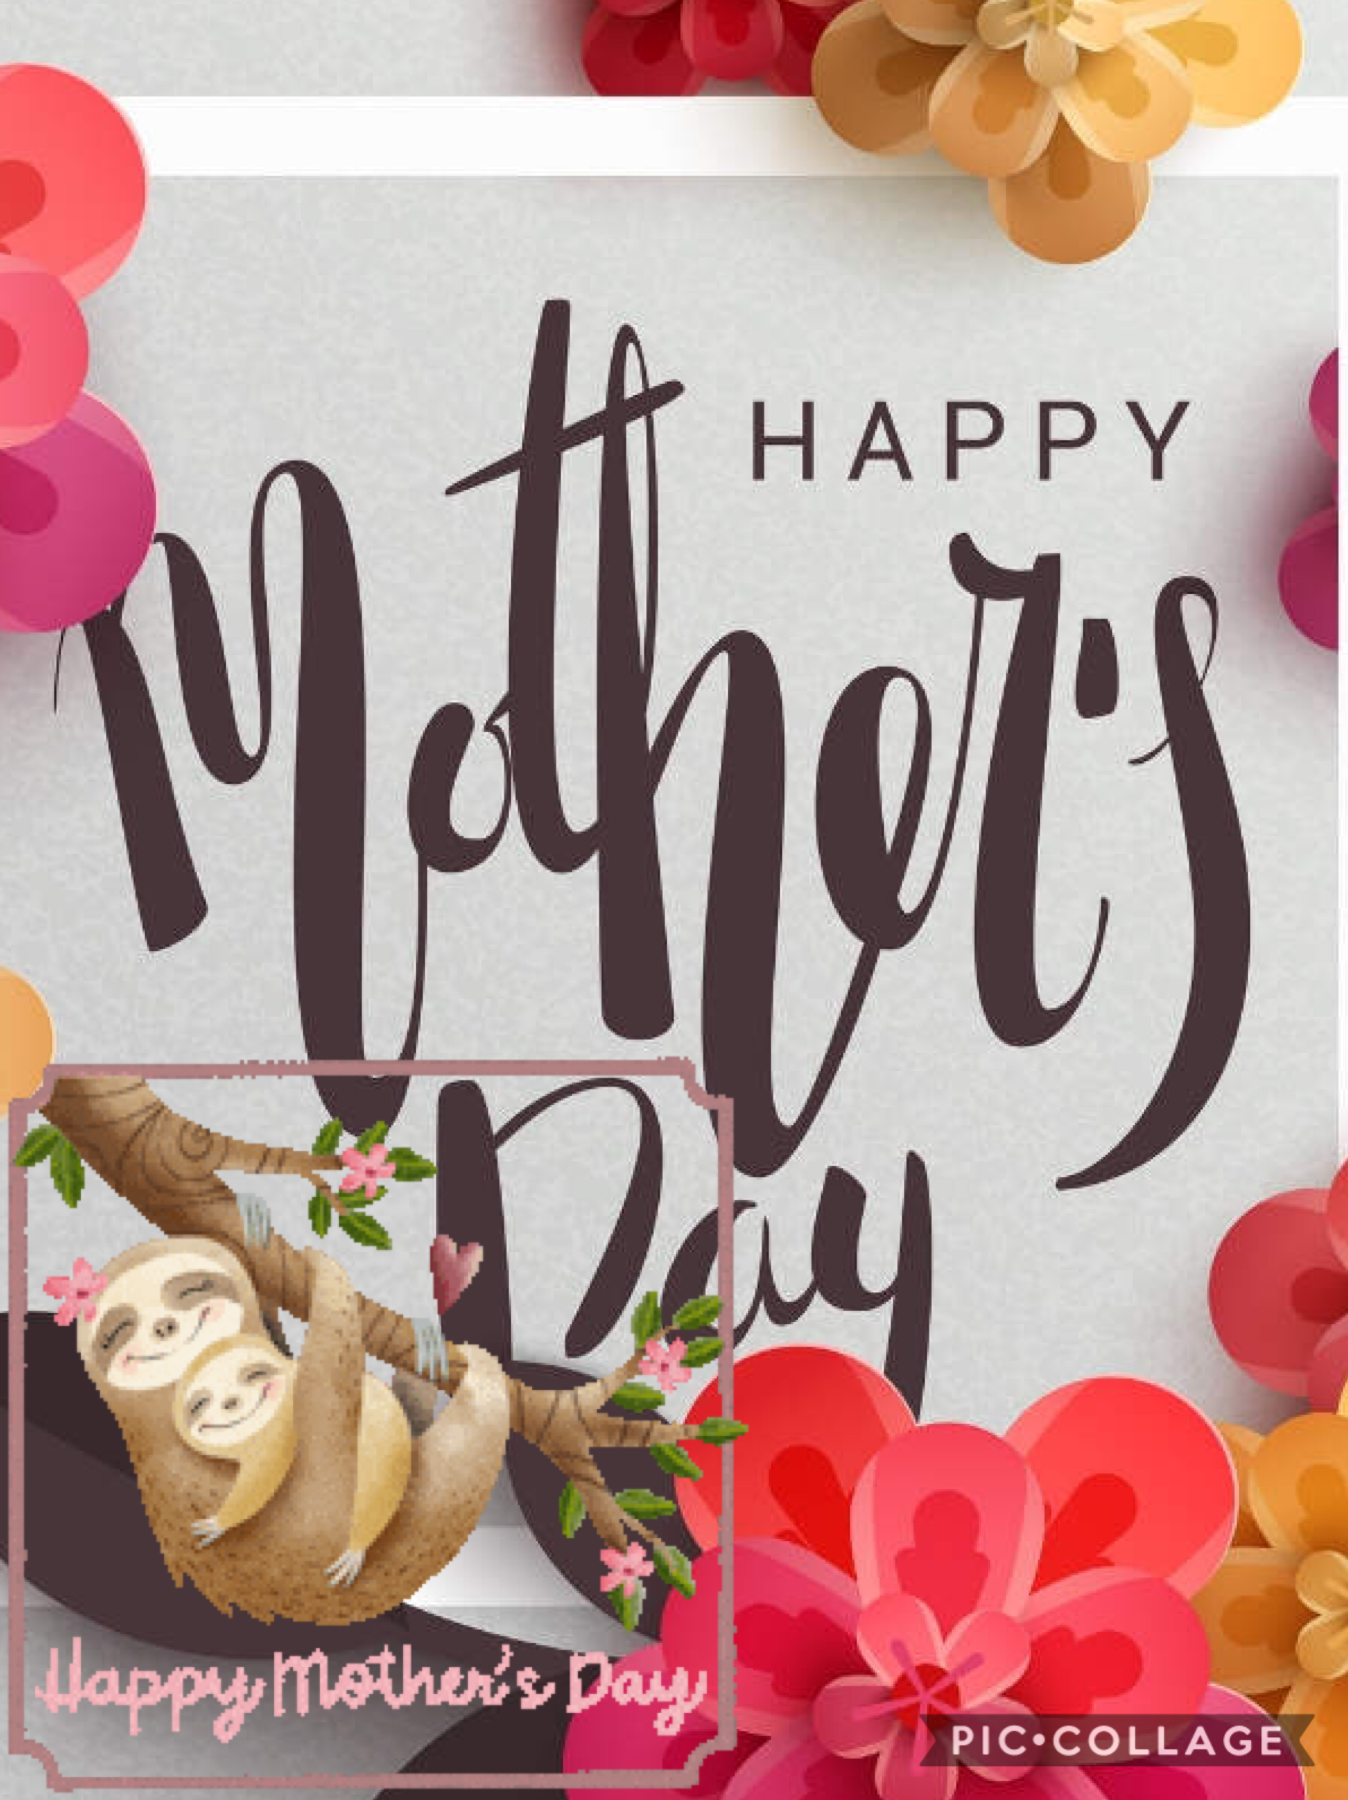 Happy Mother’s Day to all the hard working mother’s!!!!! 